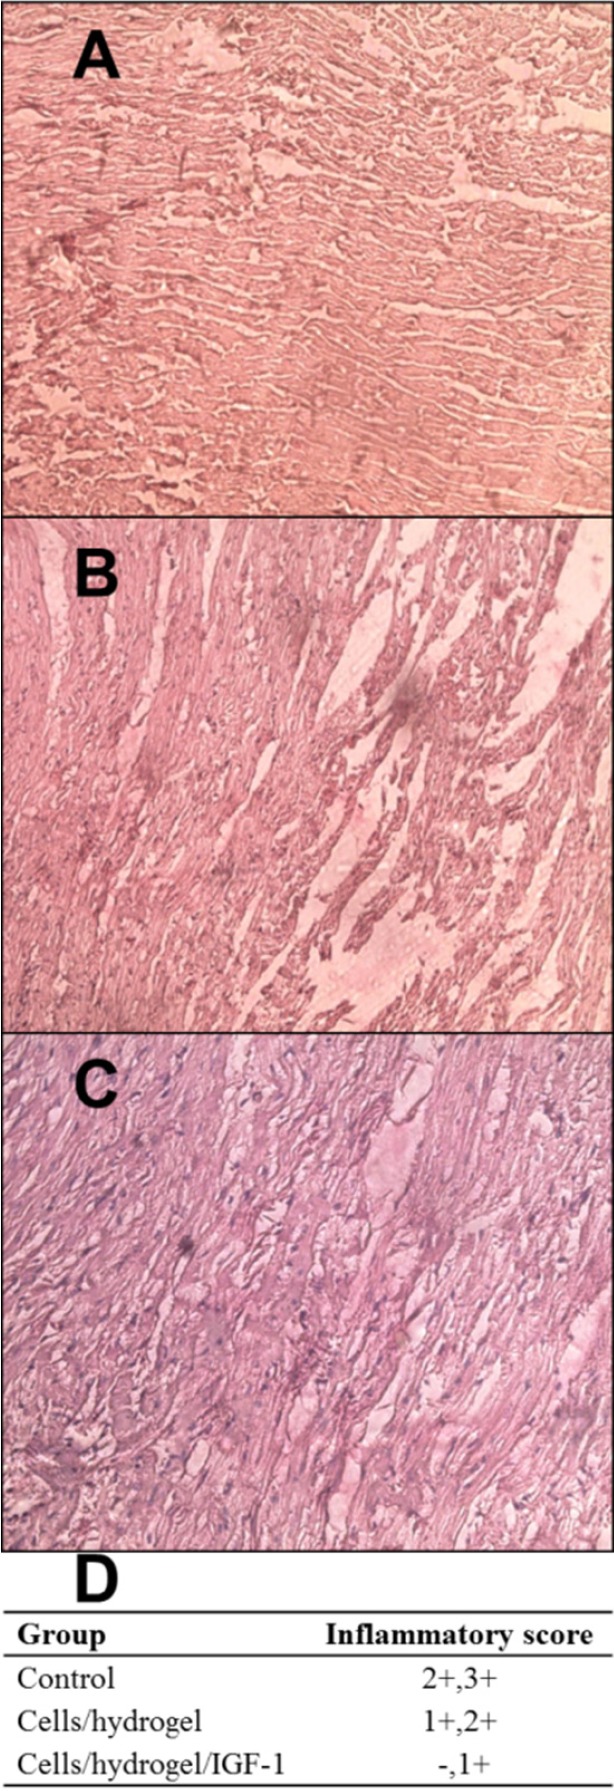 Representative images (×200) of H&E staining in the infarcted area of control (A), Cells/hydrogel (B), and Cells/hydrogel/IGF-1 (C) groups. (D) Inflammatory score in control and treated groups (n = 6